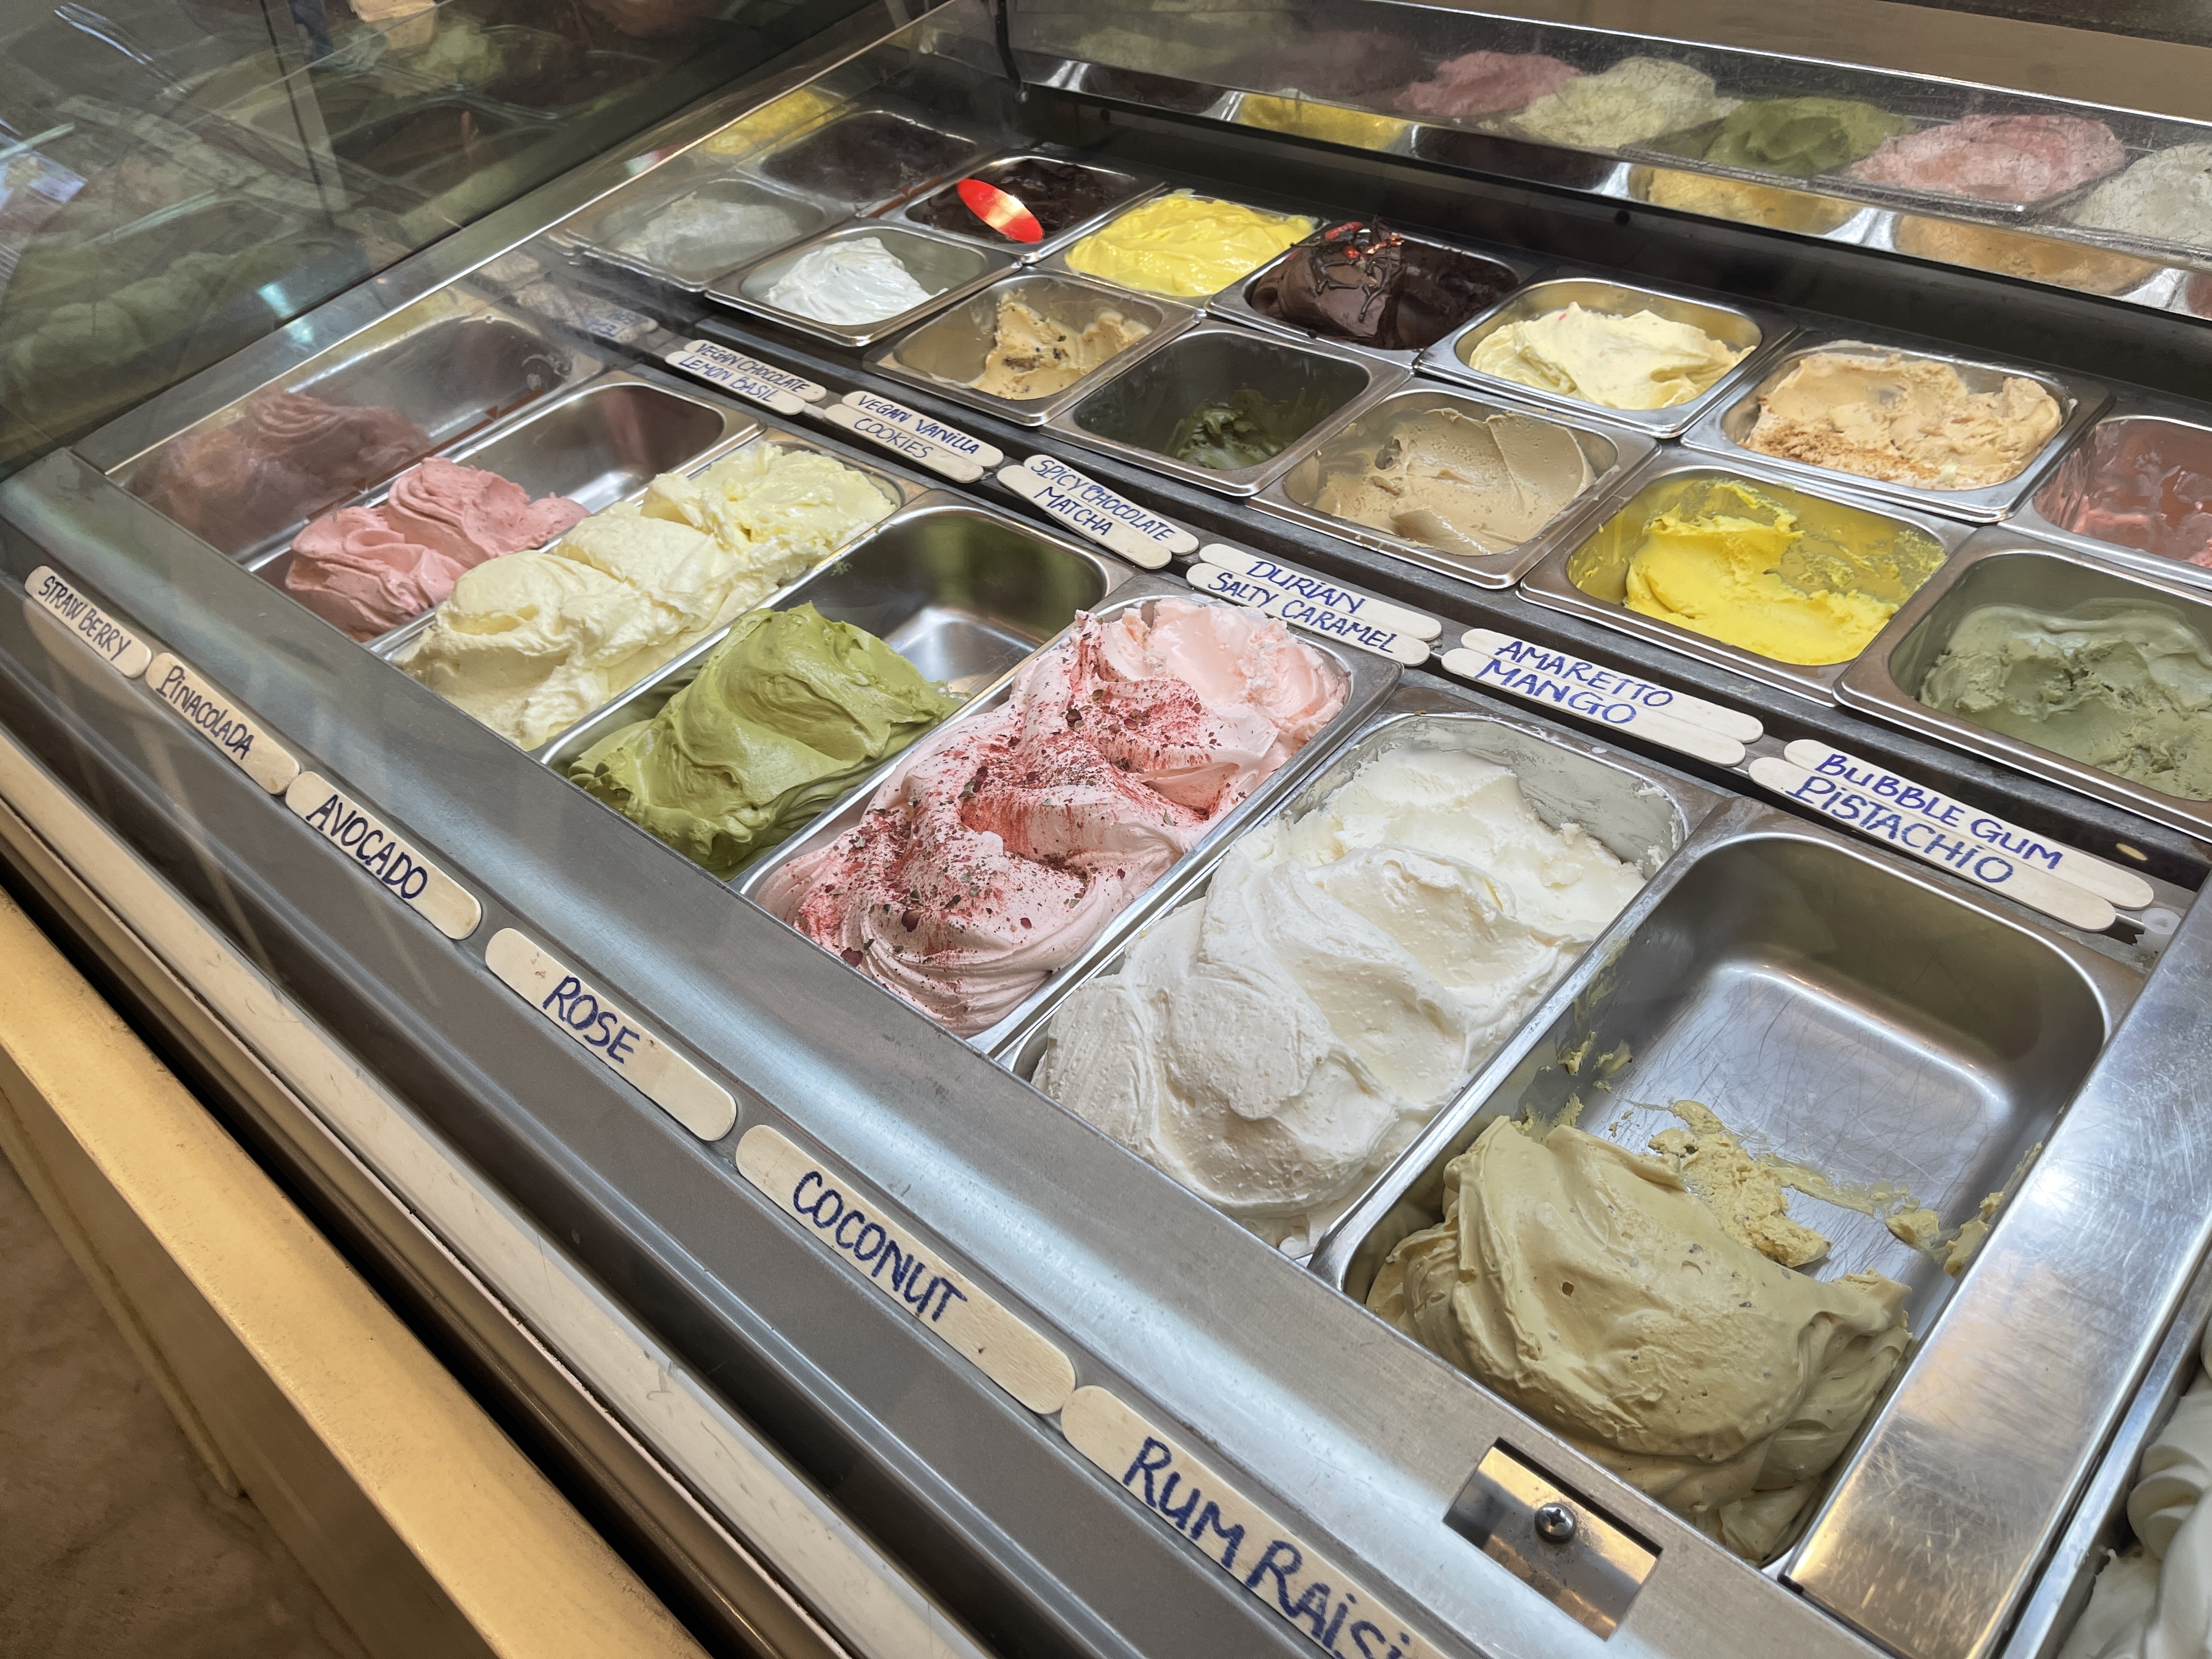 Different flavors of gelato are seen at a shop in Thao Dien Ward, Thu Duc City, Ho Chi Minh City. Photo: Dong Nguyen / Tuoi Tre News